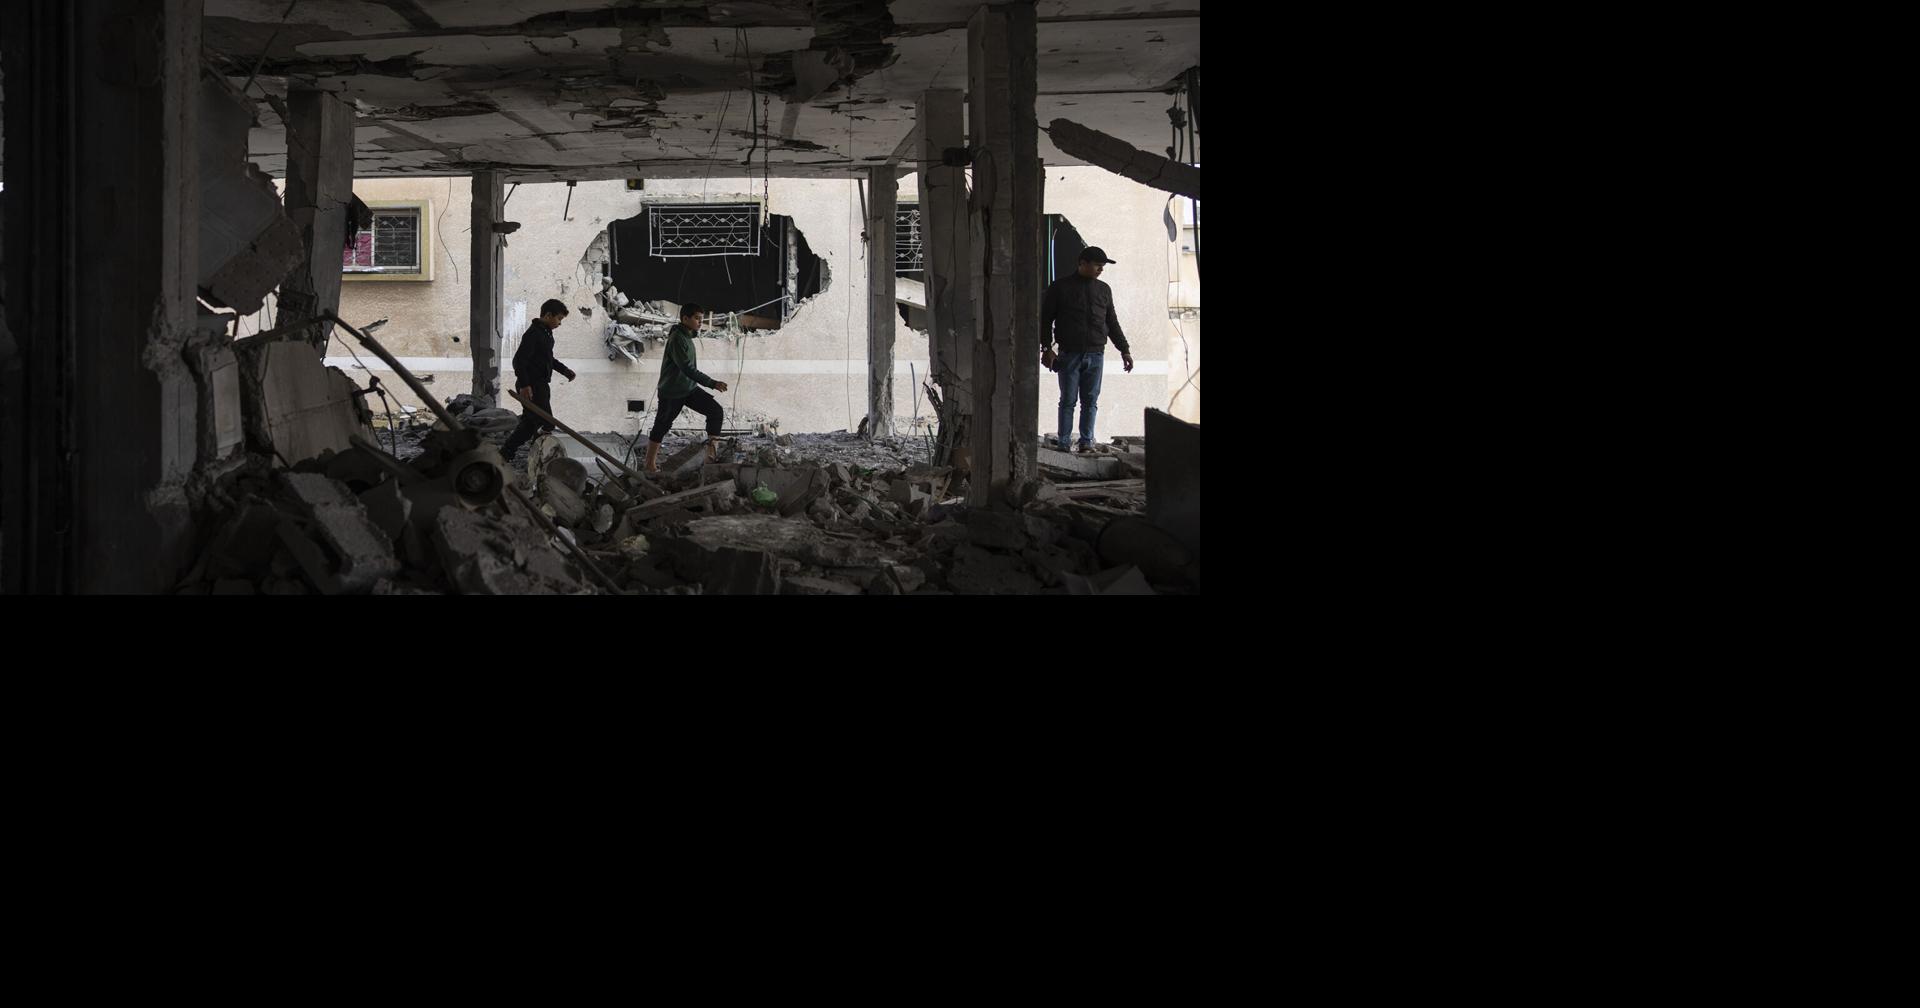 Destruction in Gaza outpaces other recent conflicts, evidence shows -  Washington Post